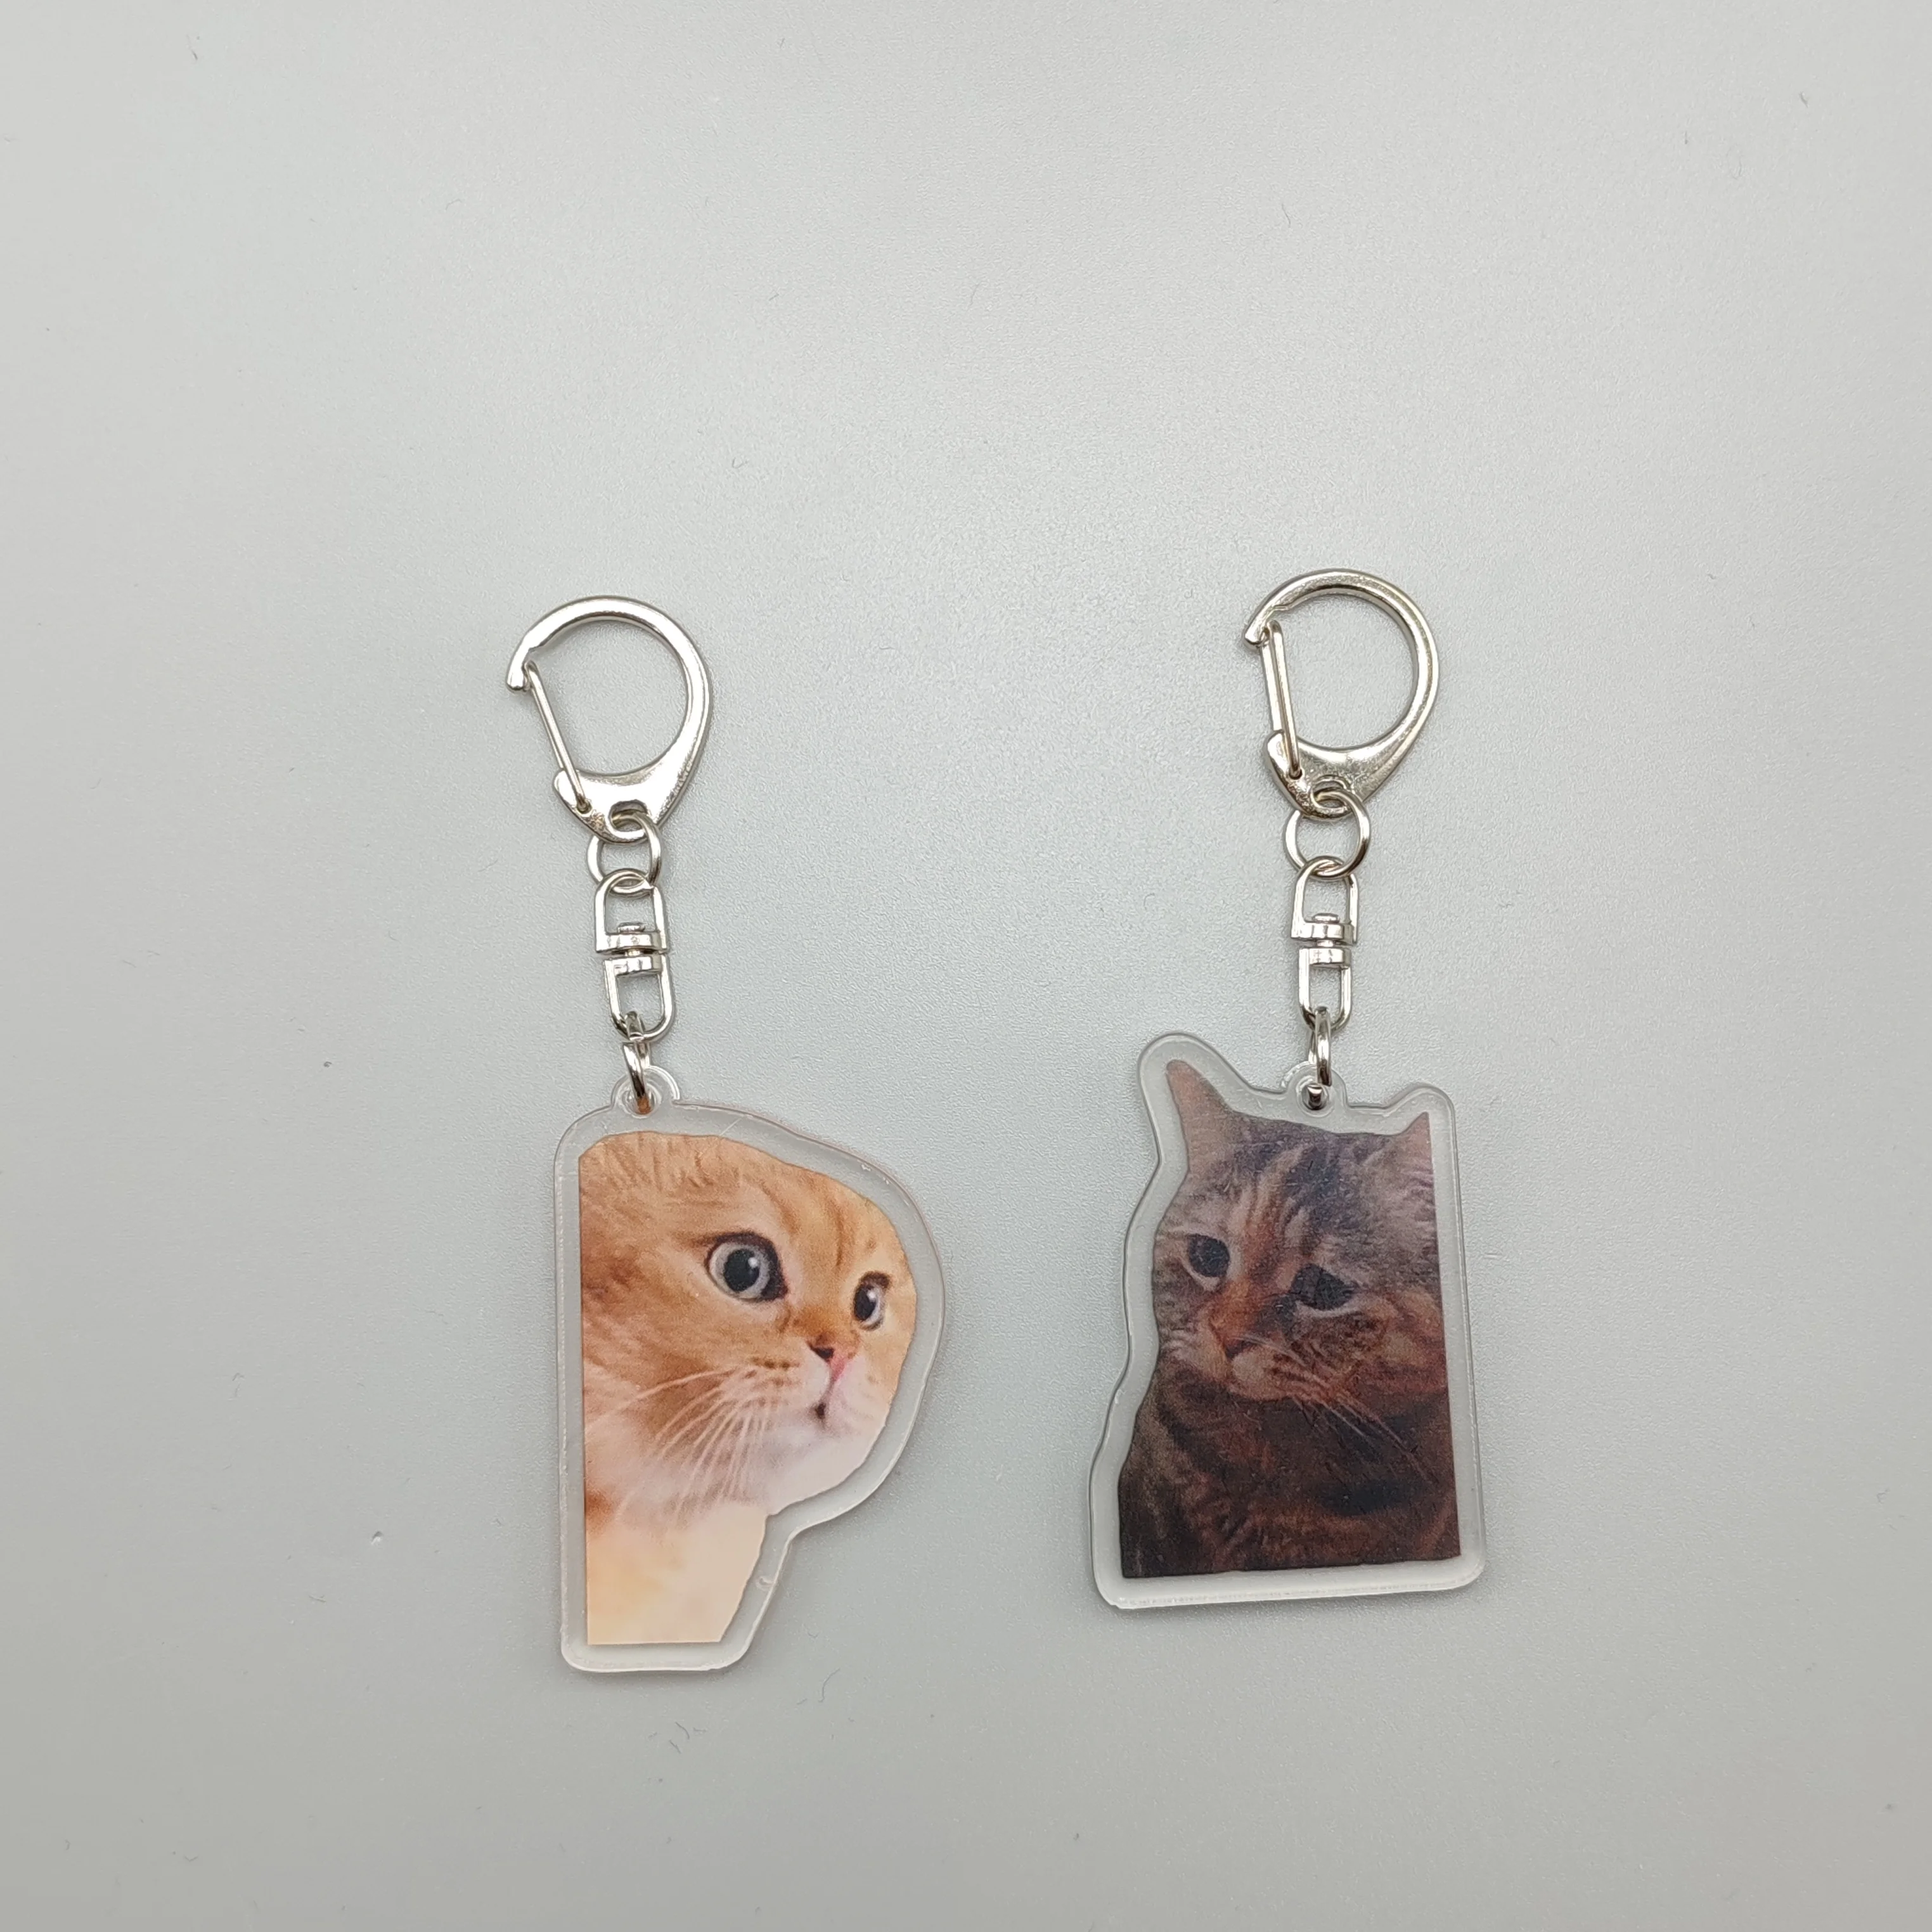 

Women's Bag Pendant Cute Keychain For Bags Two Cats Talking Meme Talking Cats Polite Cat Cute Things Cheap Gift For Best Friend